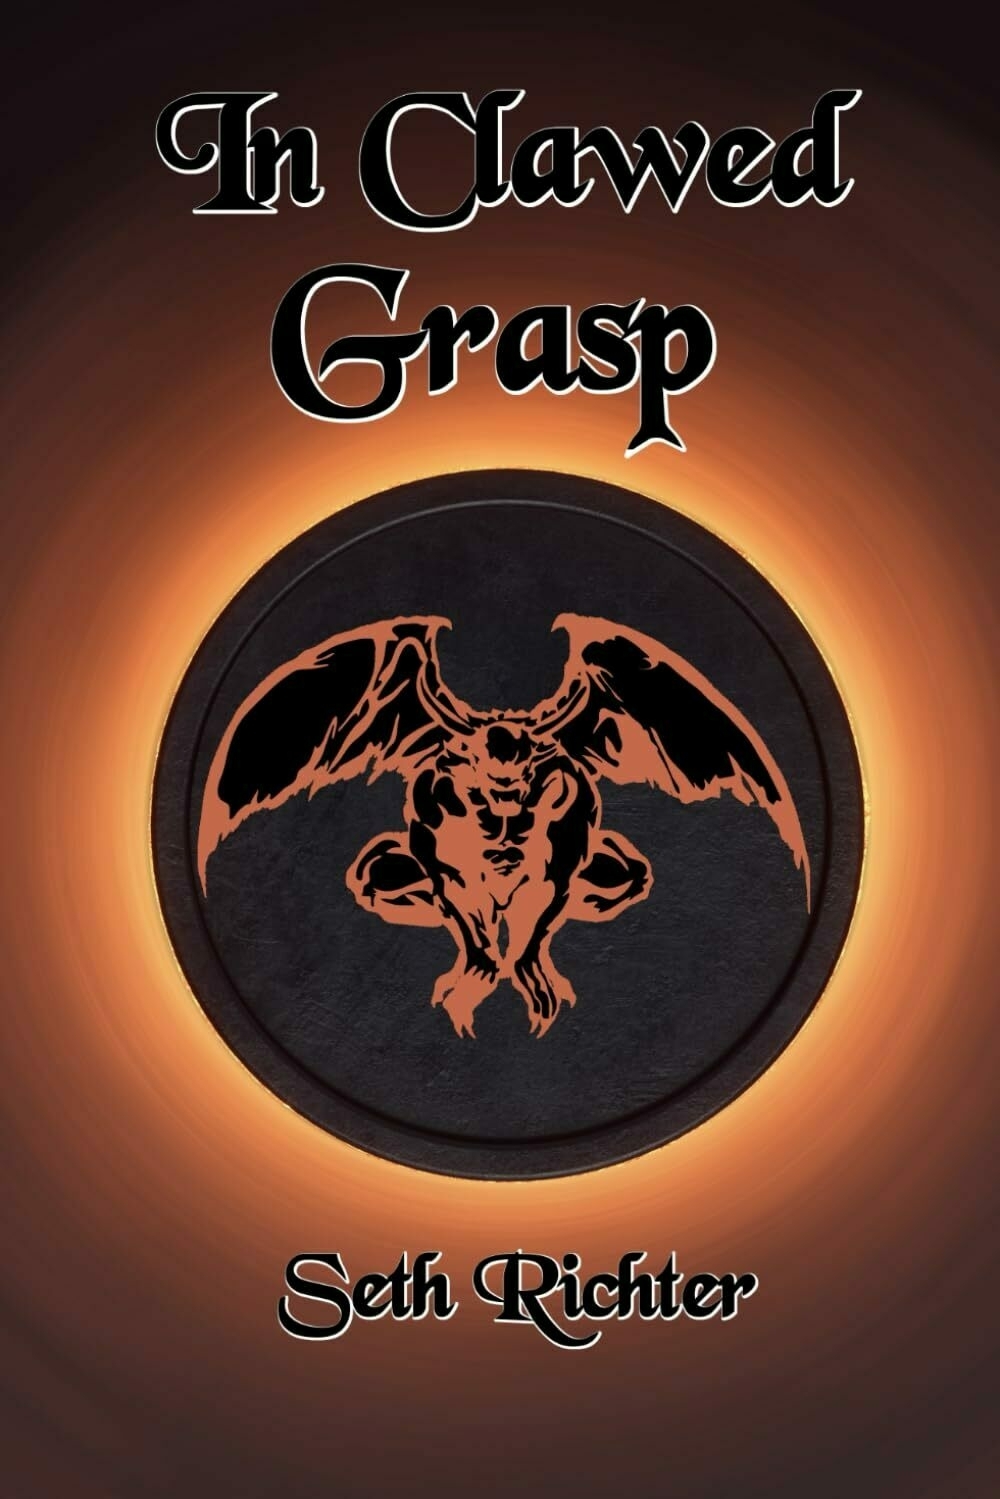 A book cover with stylized text 'In Clawed Grasp' and the author name 'Seth Richter' features a dark circle with an orange halo and a silhouetted bat-like creature (a gargoyle)